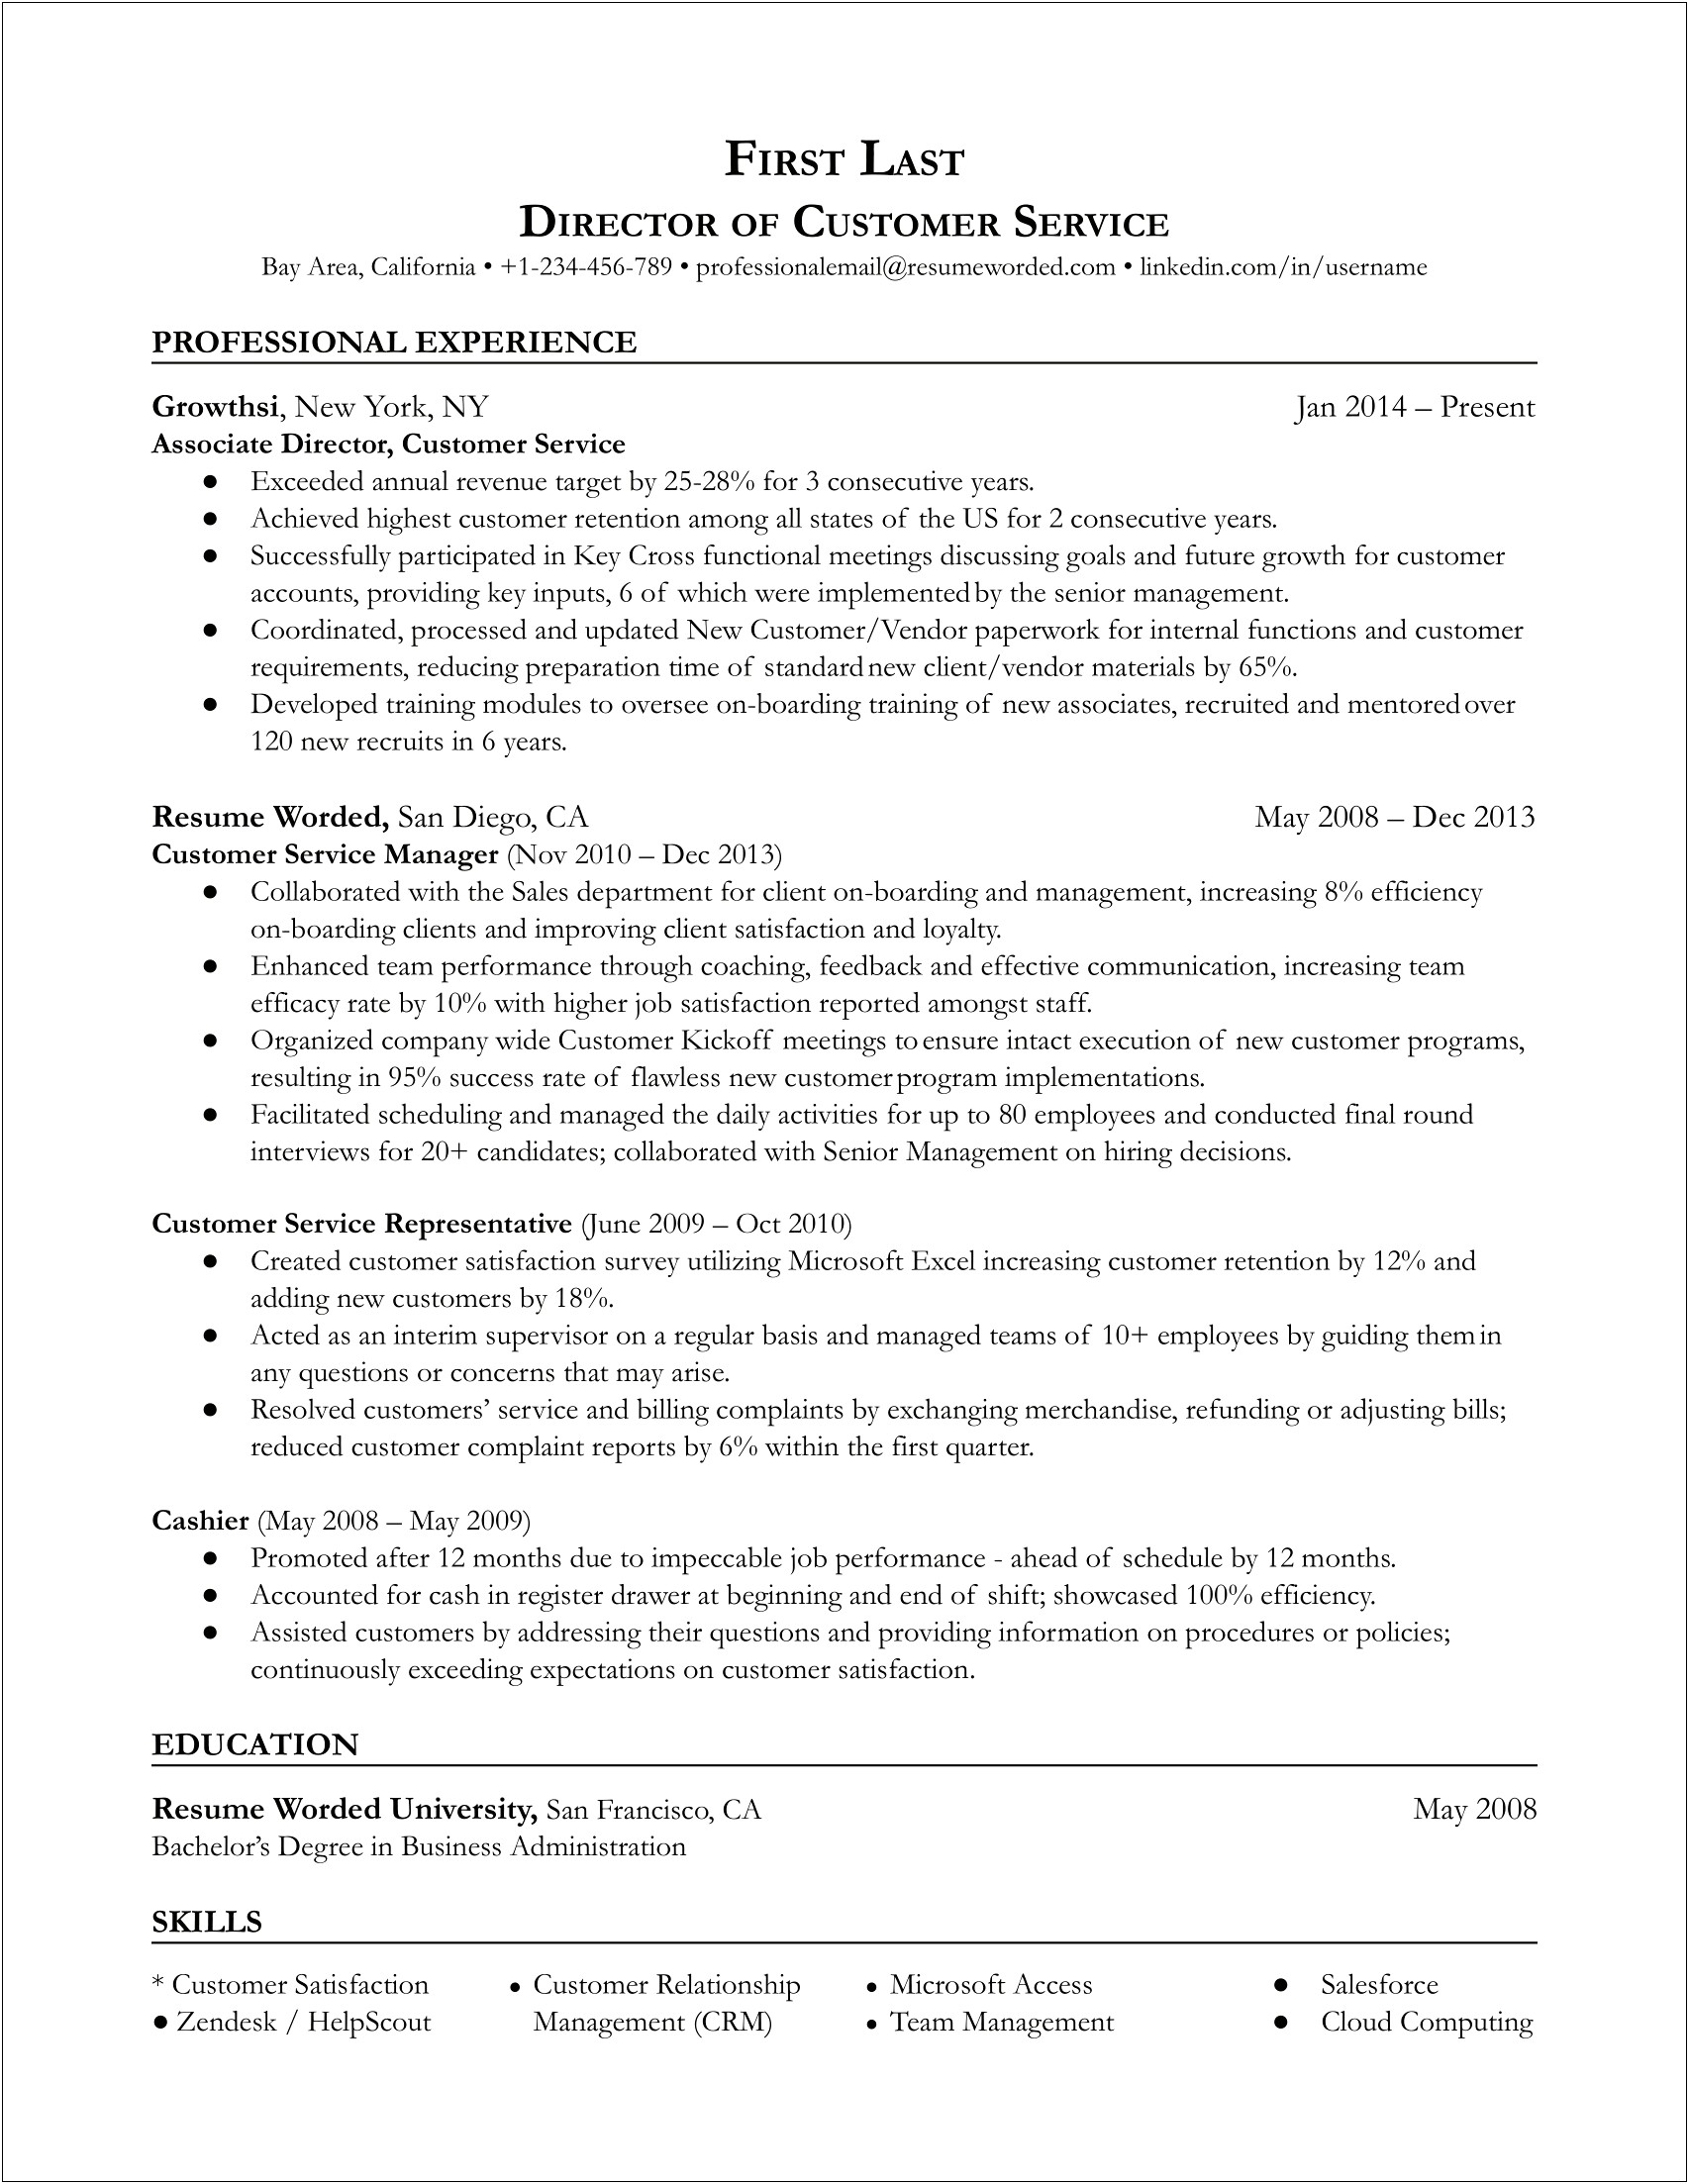 Resume Qualifications Examples For Customer Service